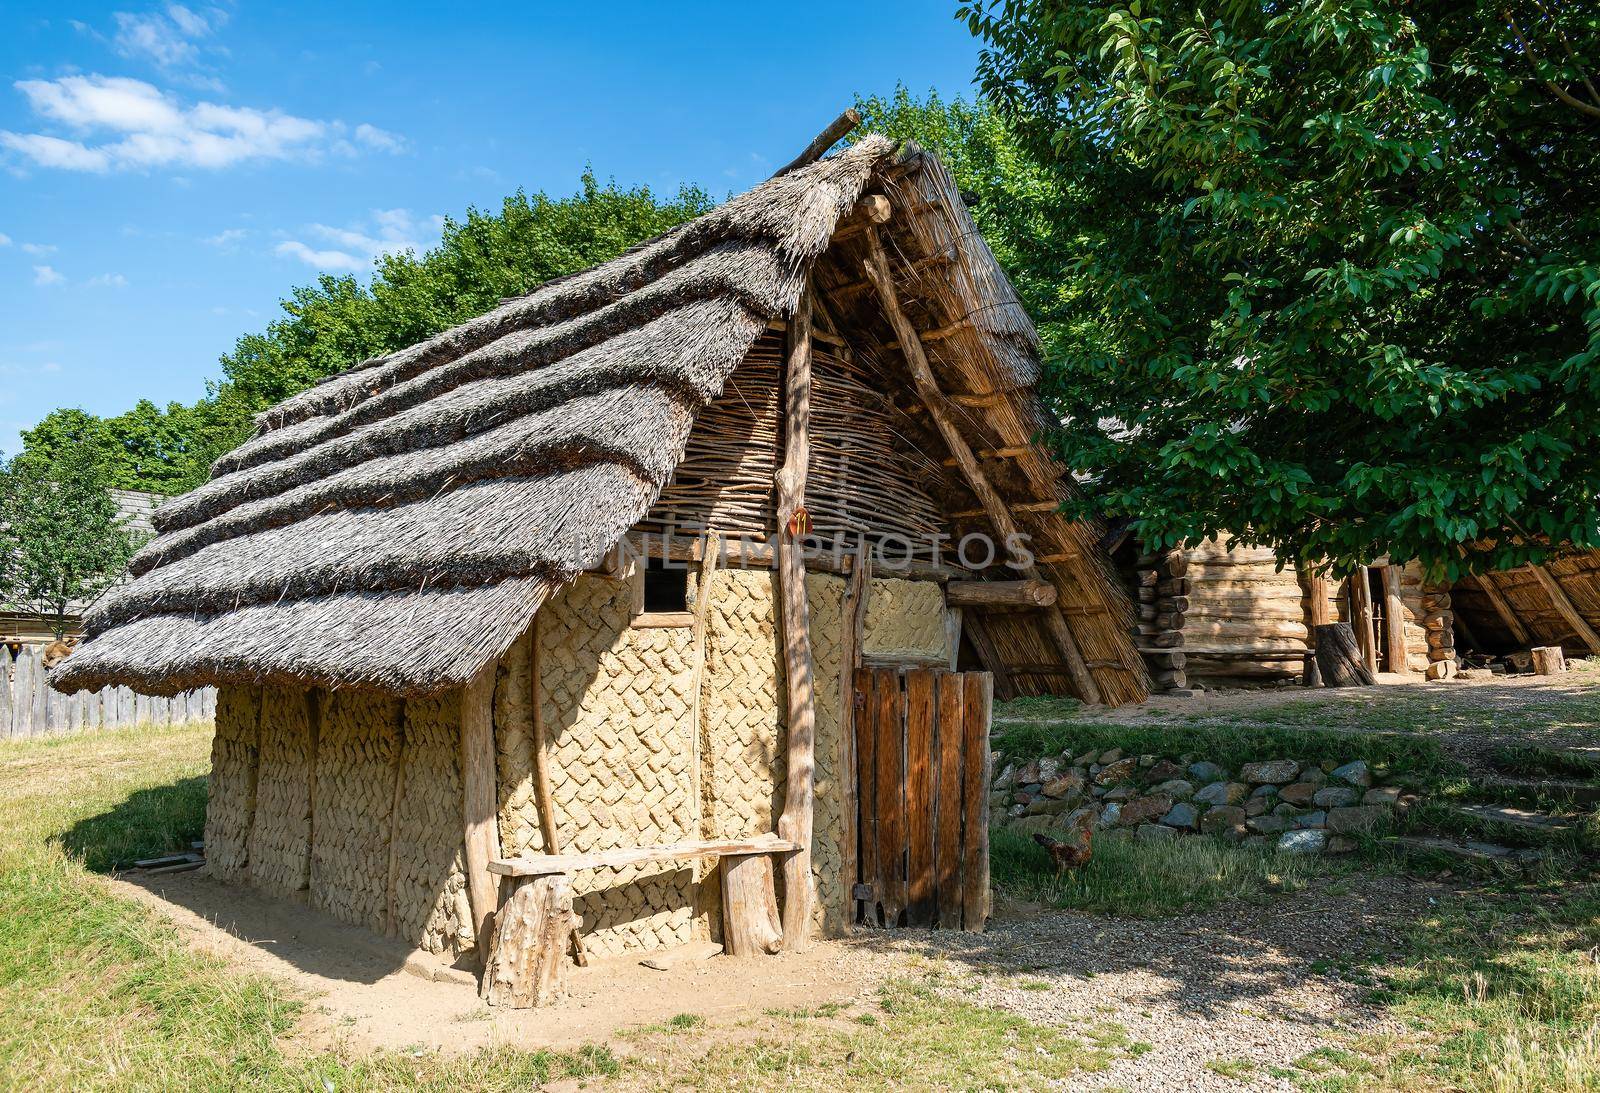 Great Moravian Museum Blue Czech Republic. Mud brick huts, thatched roof and gable braided from wicker